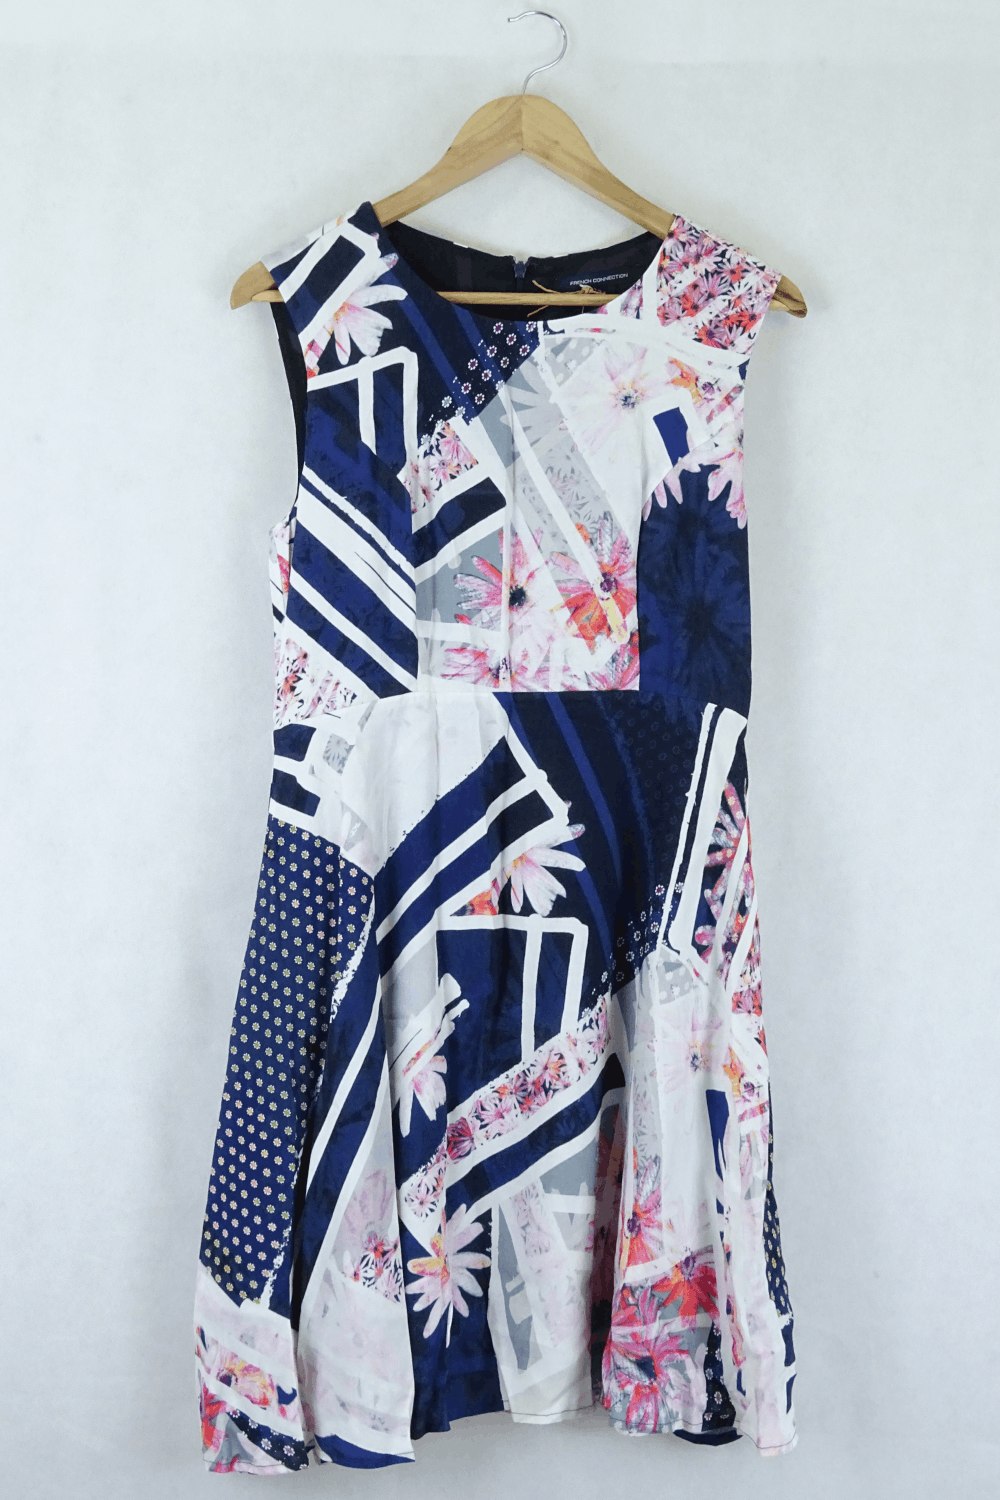 French Connection Navy Print Dress 12